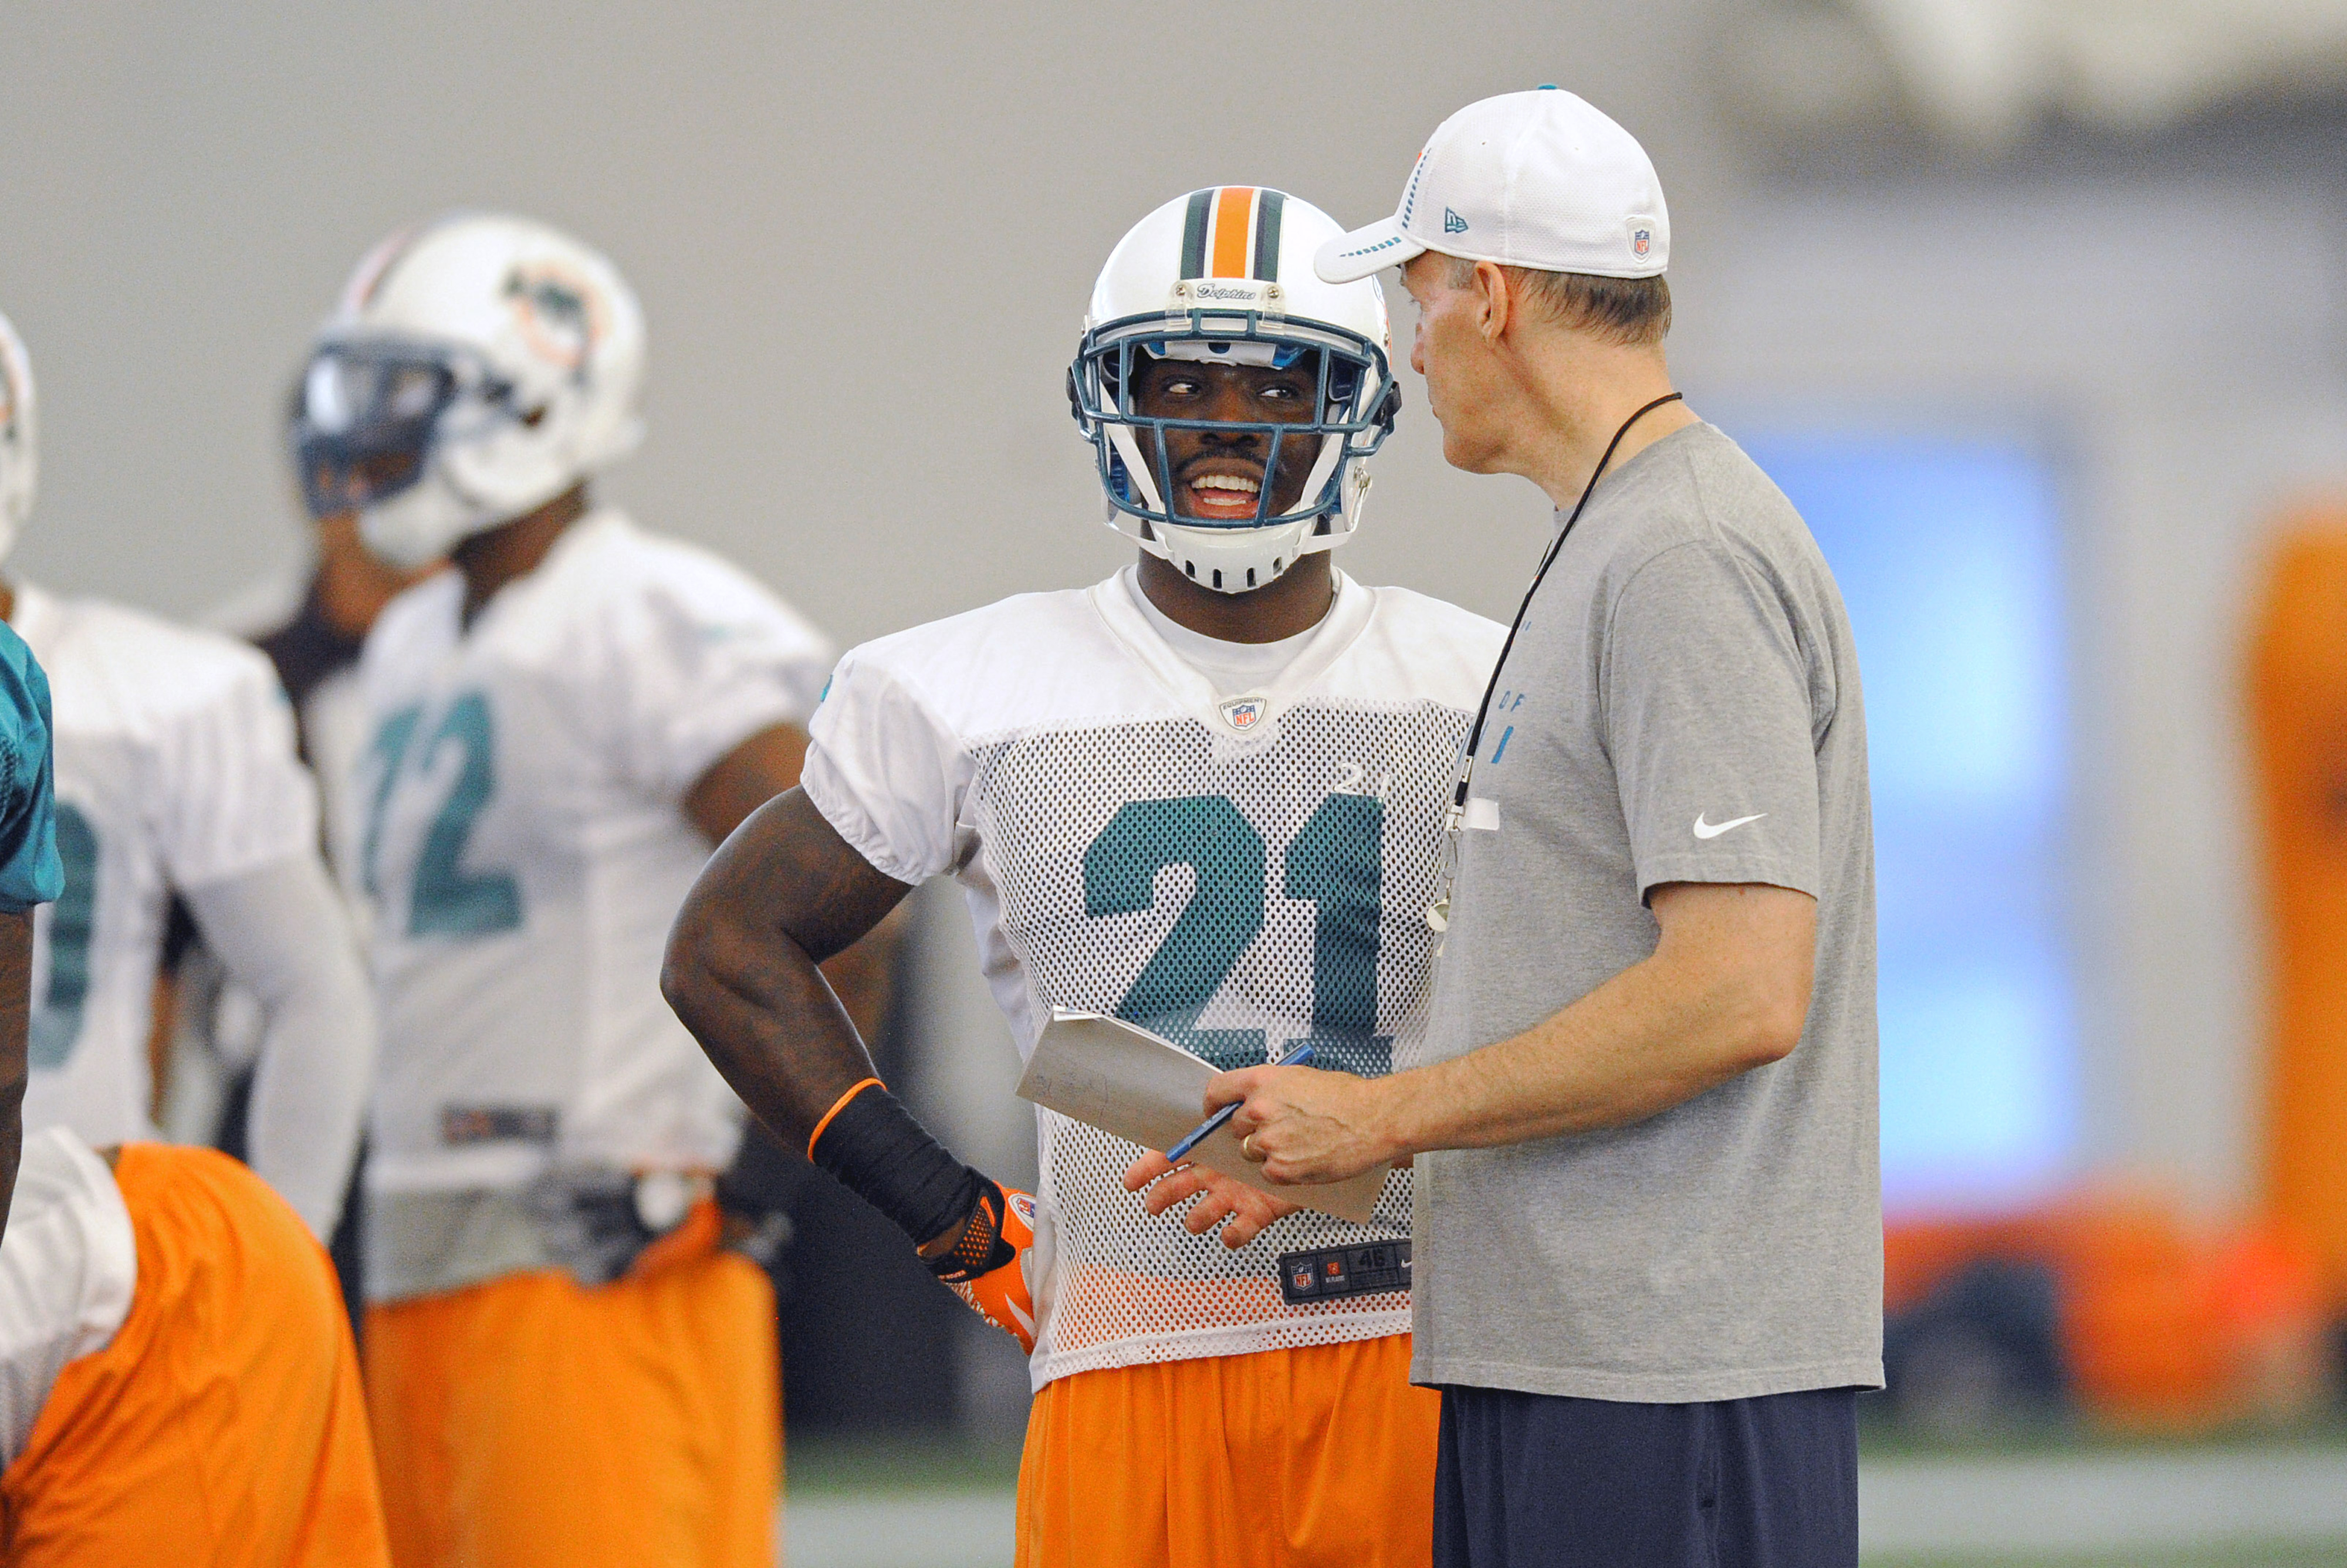 July 27 2012; Davie, FL, USA; Miami Dolphins defensive back Vontae Davis (left) talks with head coach Joe Philbin (right) during practice at the Dolphins training facility. Mandatory Credit: Steve Mitchell-US PRESSWIRE